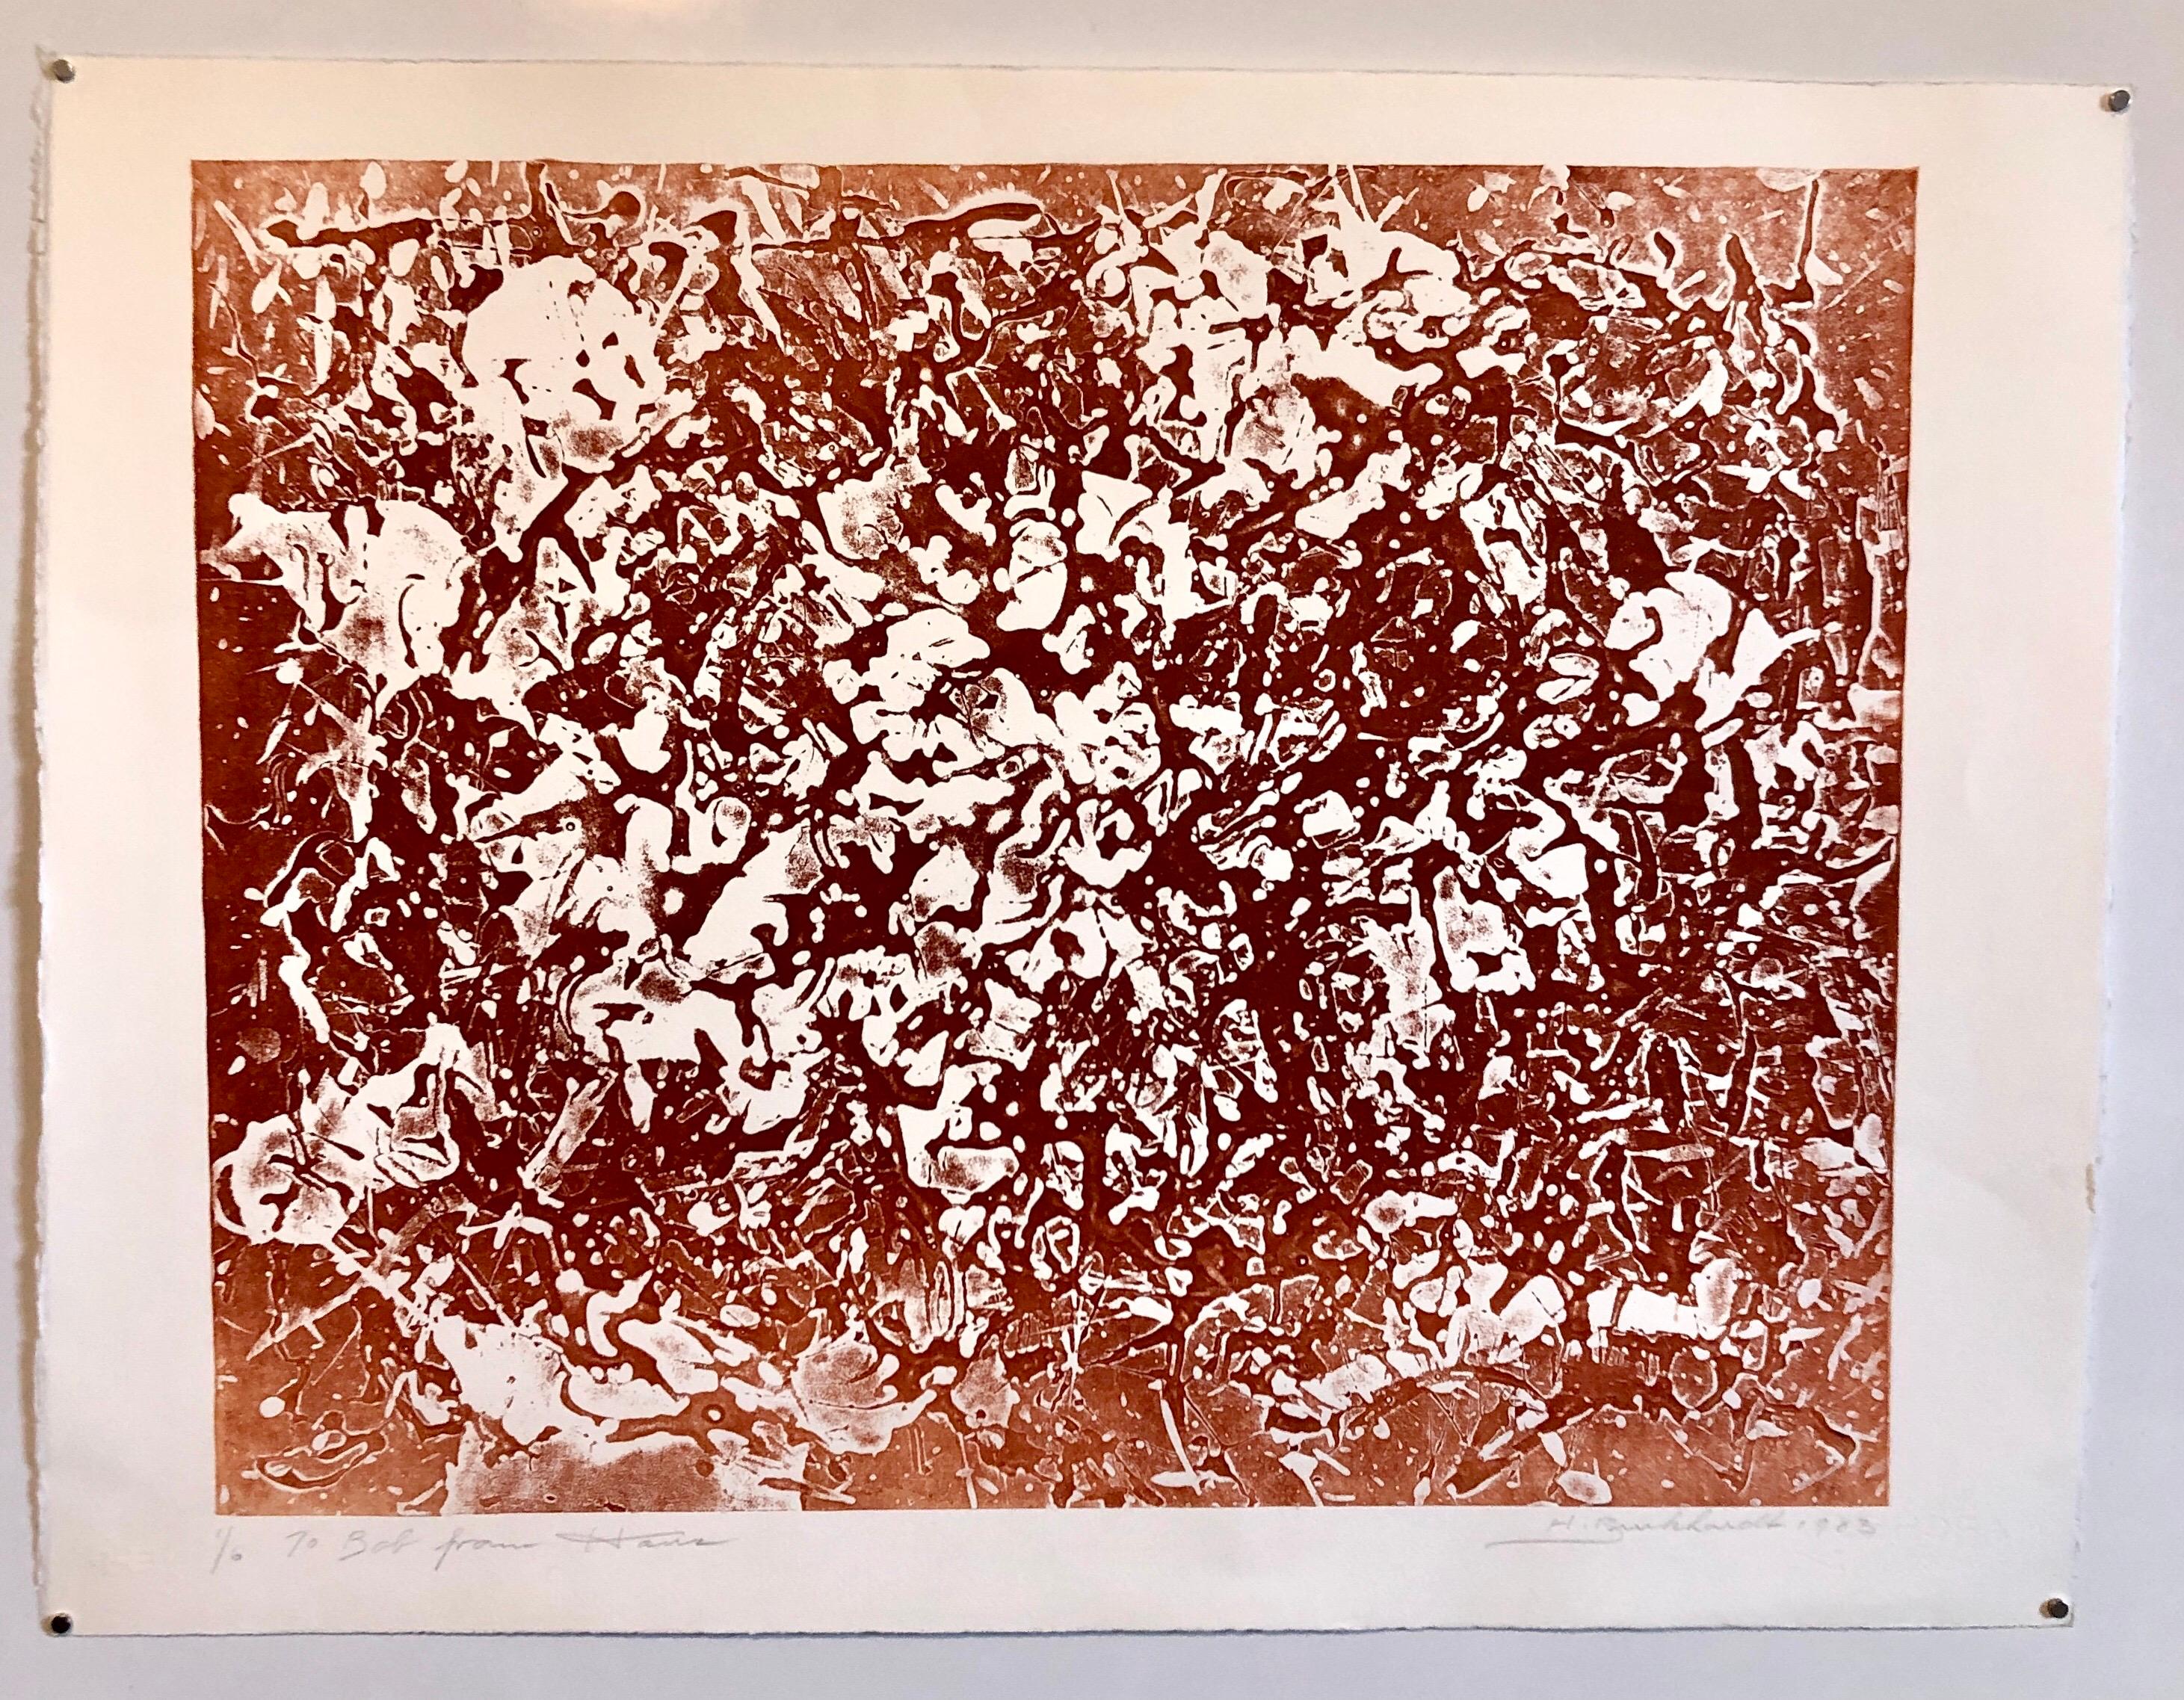 California Abstract Expressionist Linocut Lithograph Sepia Print Edition of 6 For Sale 2